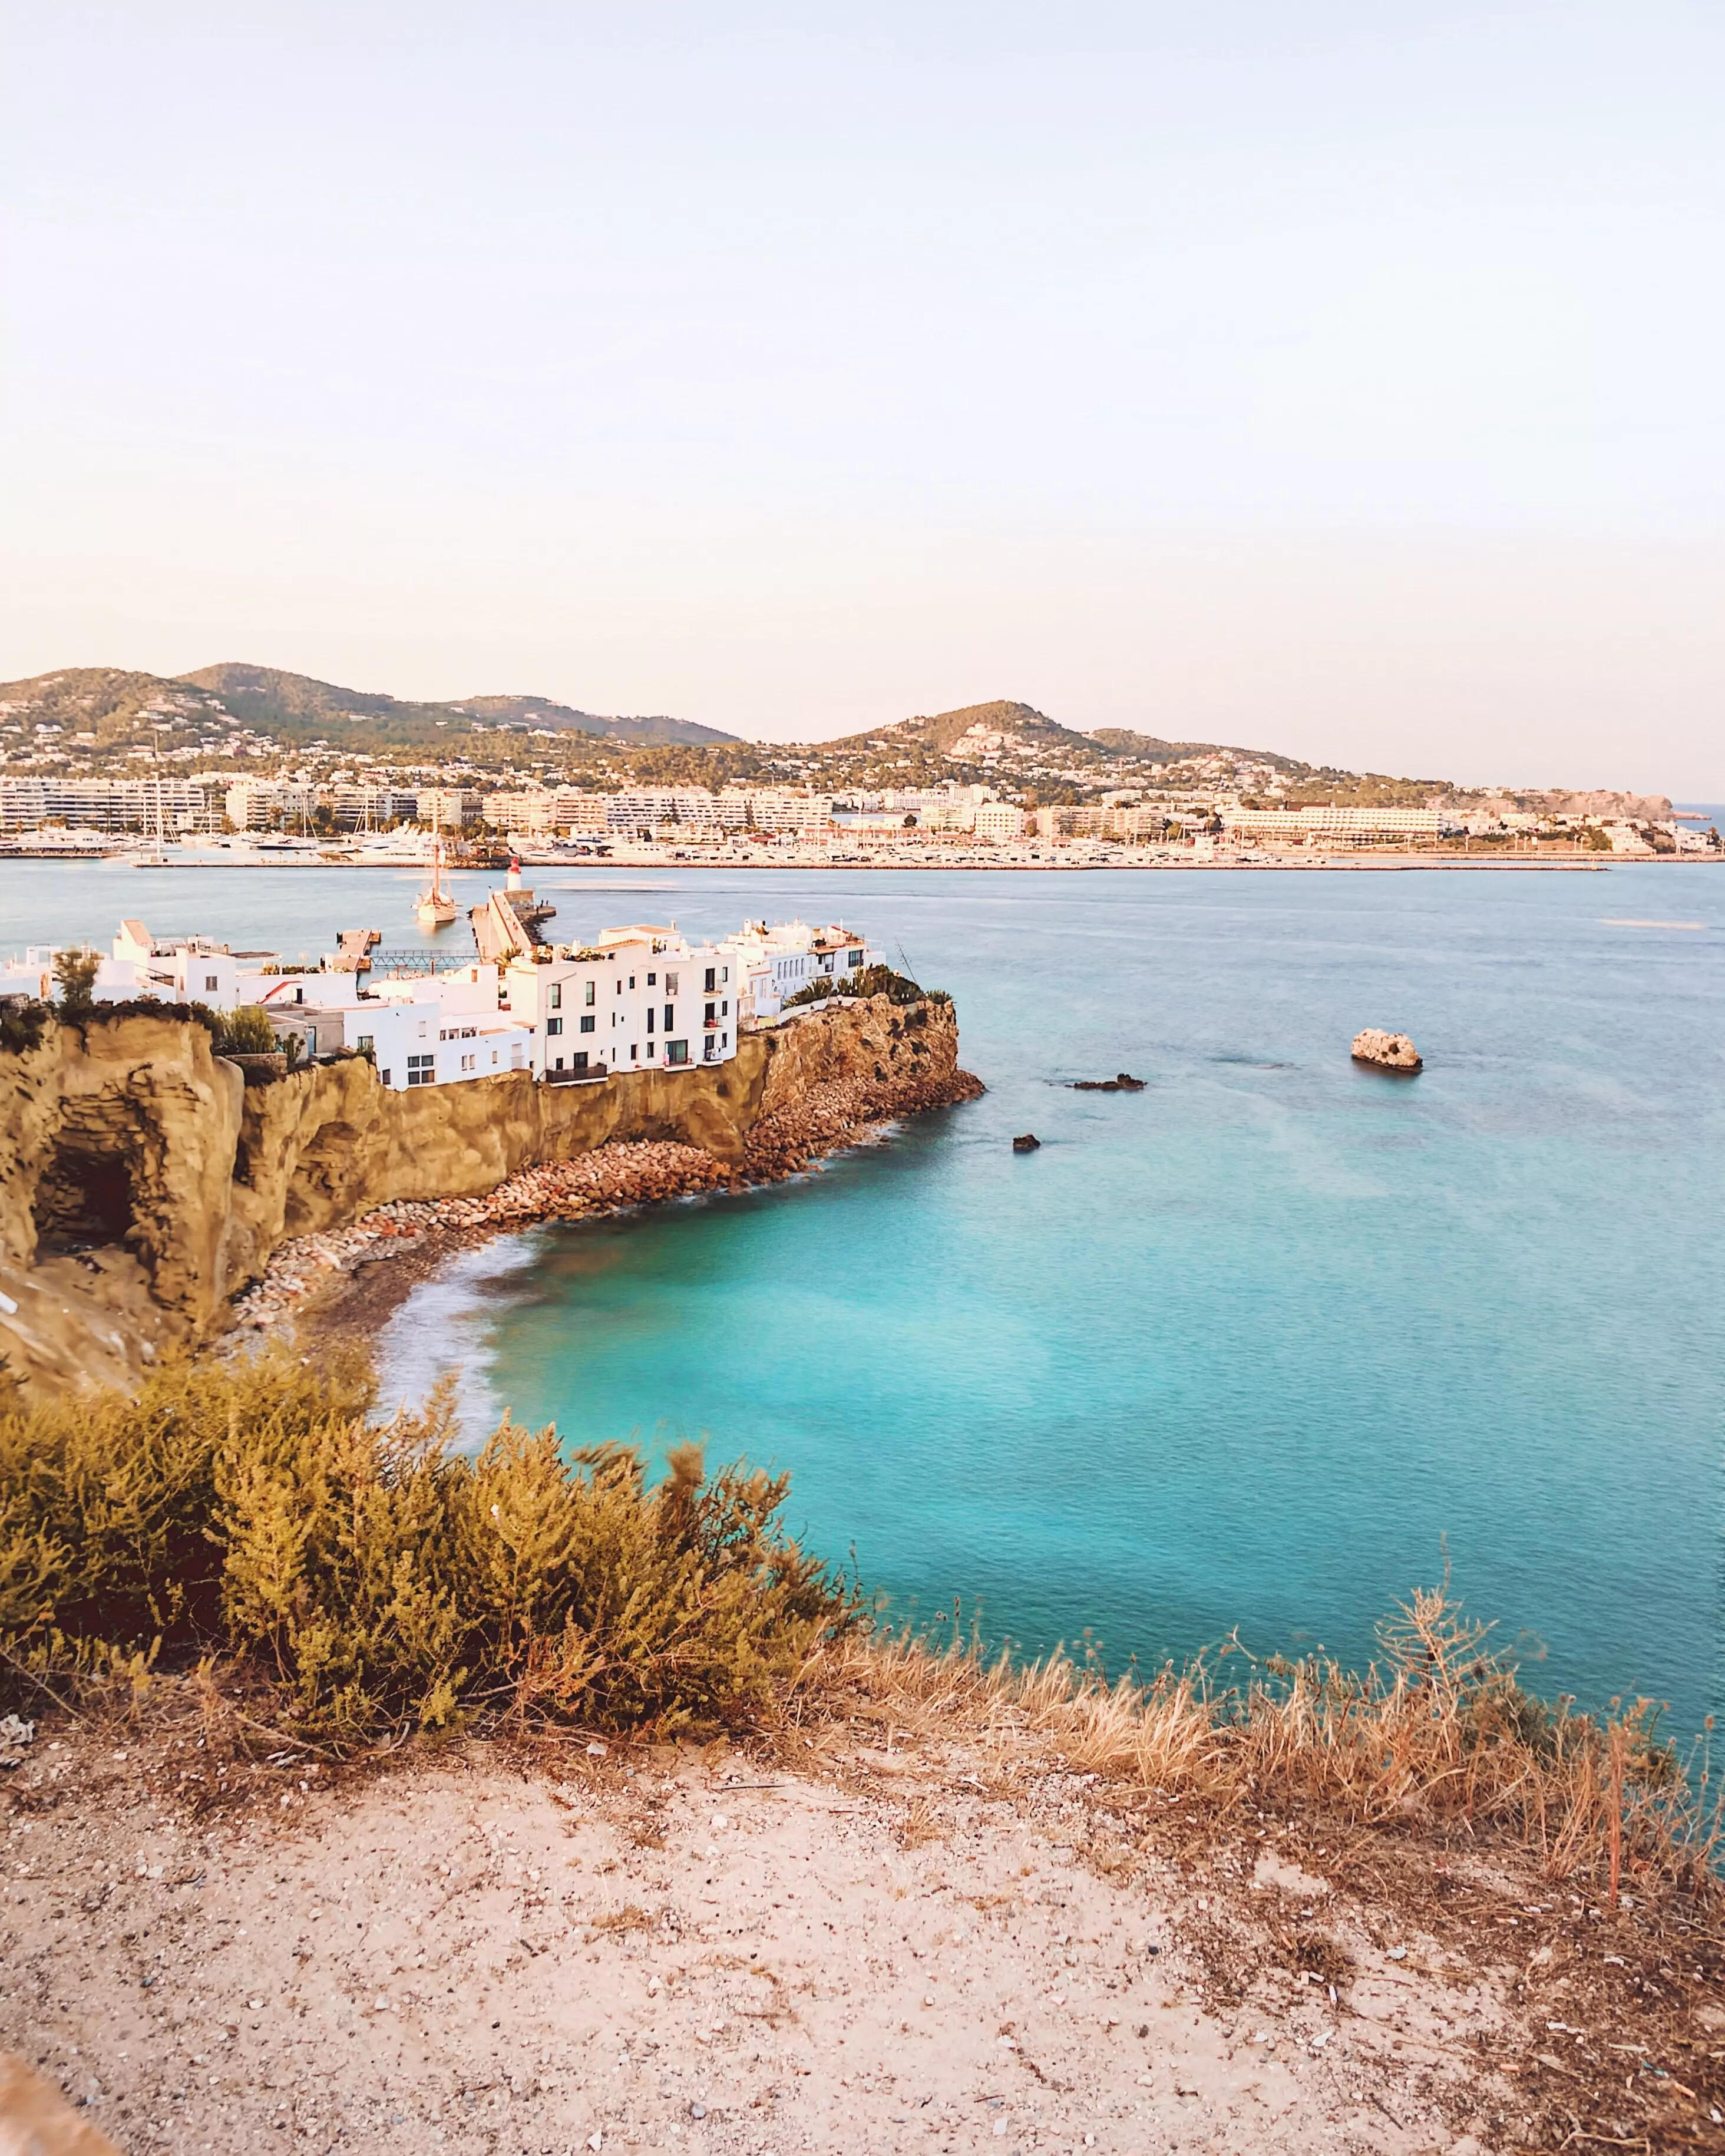 Ibiza could be on the cards for 2020 (